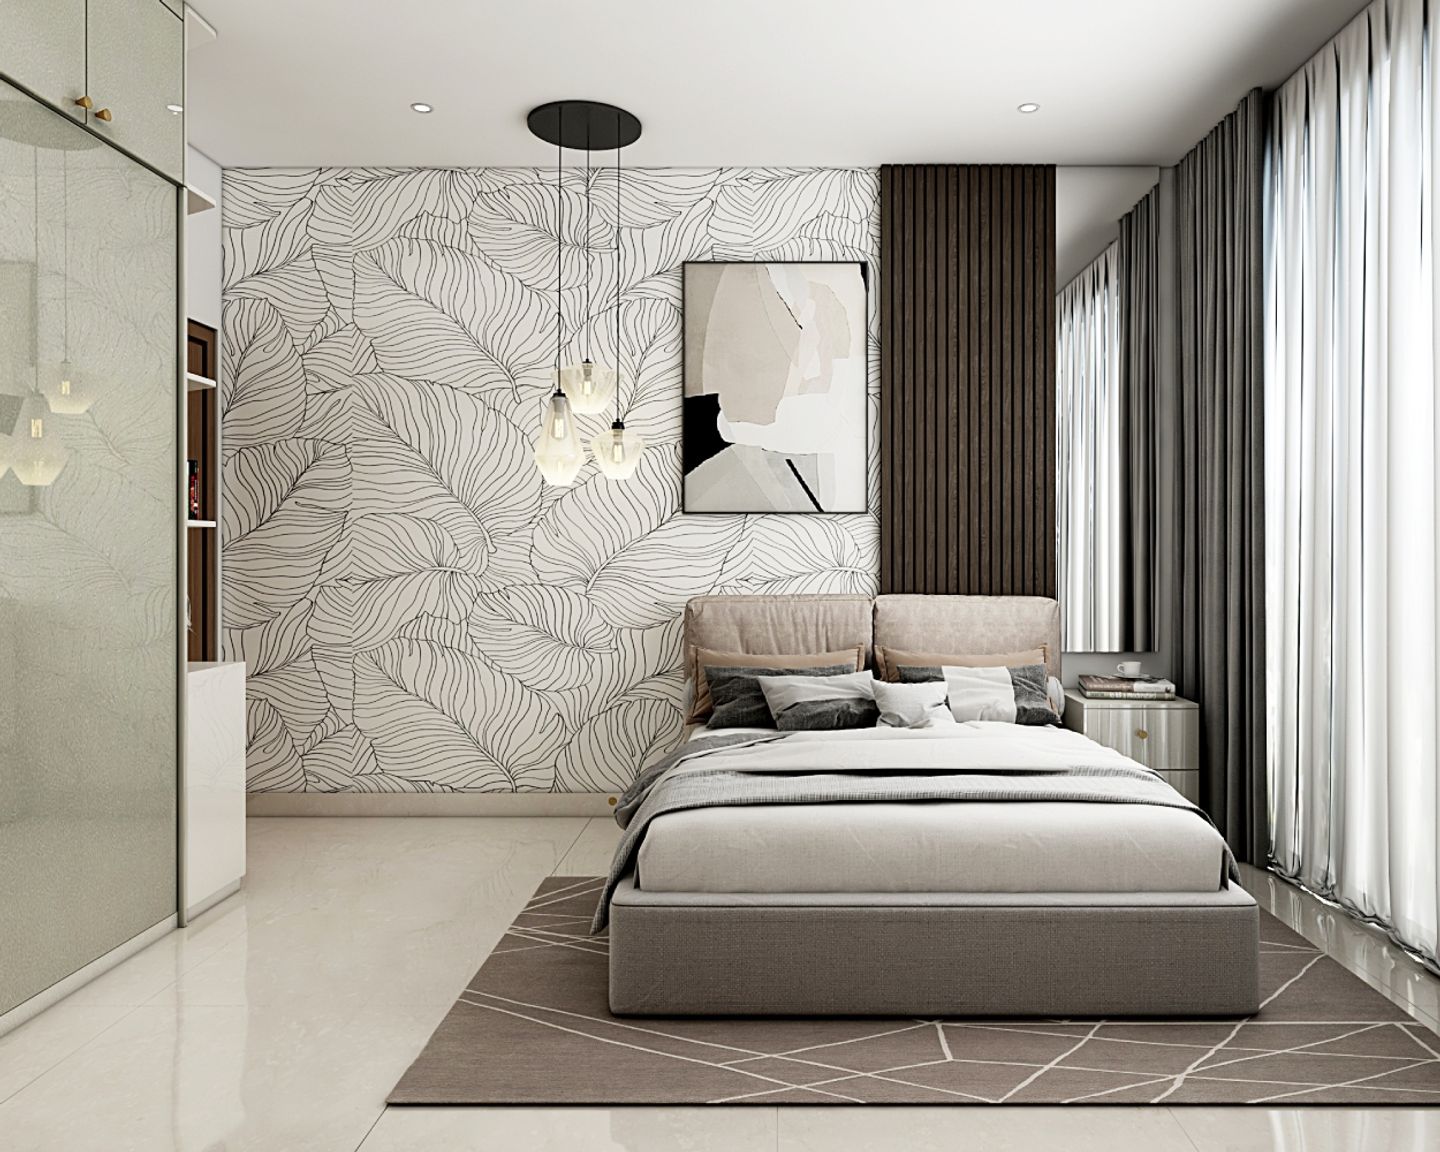 Spacious Guest Room Design With Beige Bed, Off-White Side Table And Mirror, 2-Door Glossy Grey Sliding Wardrobe And Leafy Abstract Wallpaper - Livspace